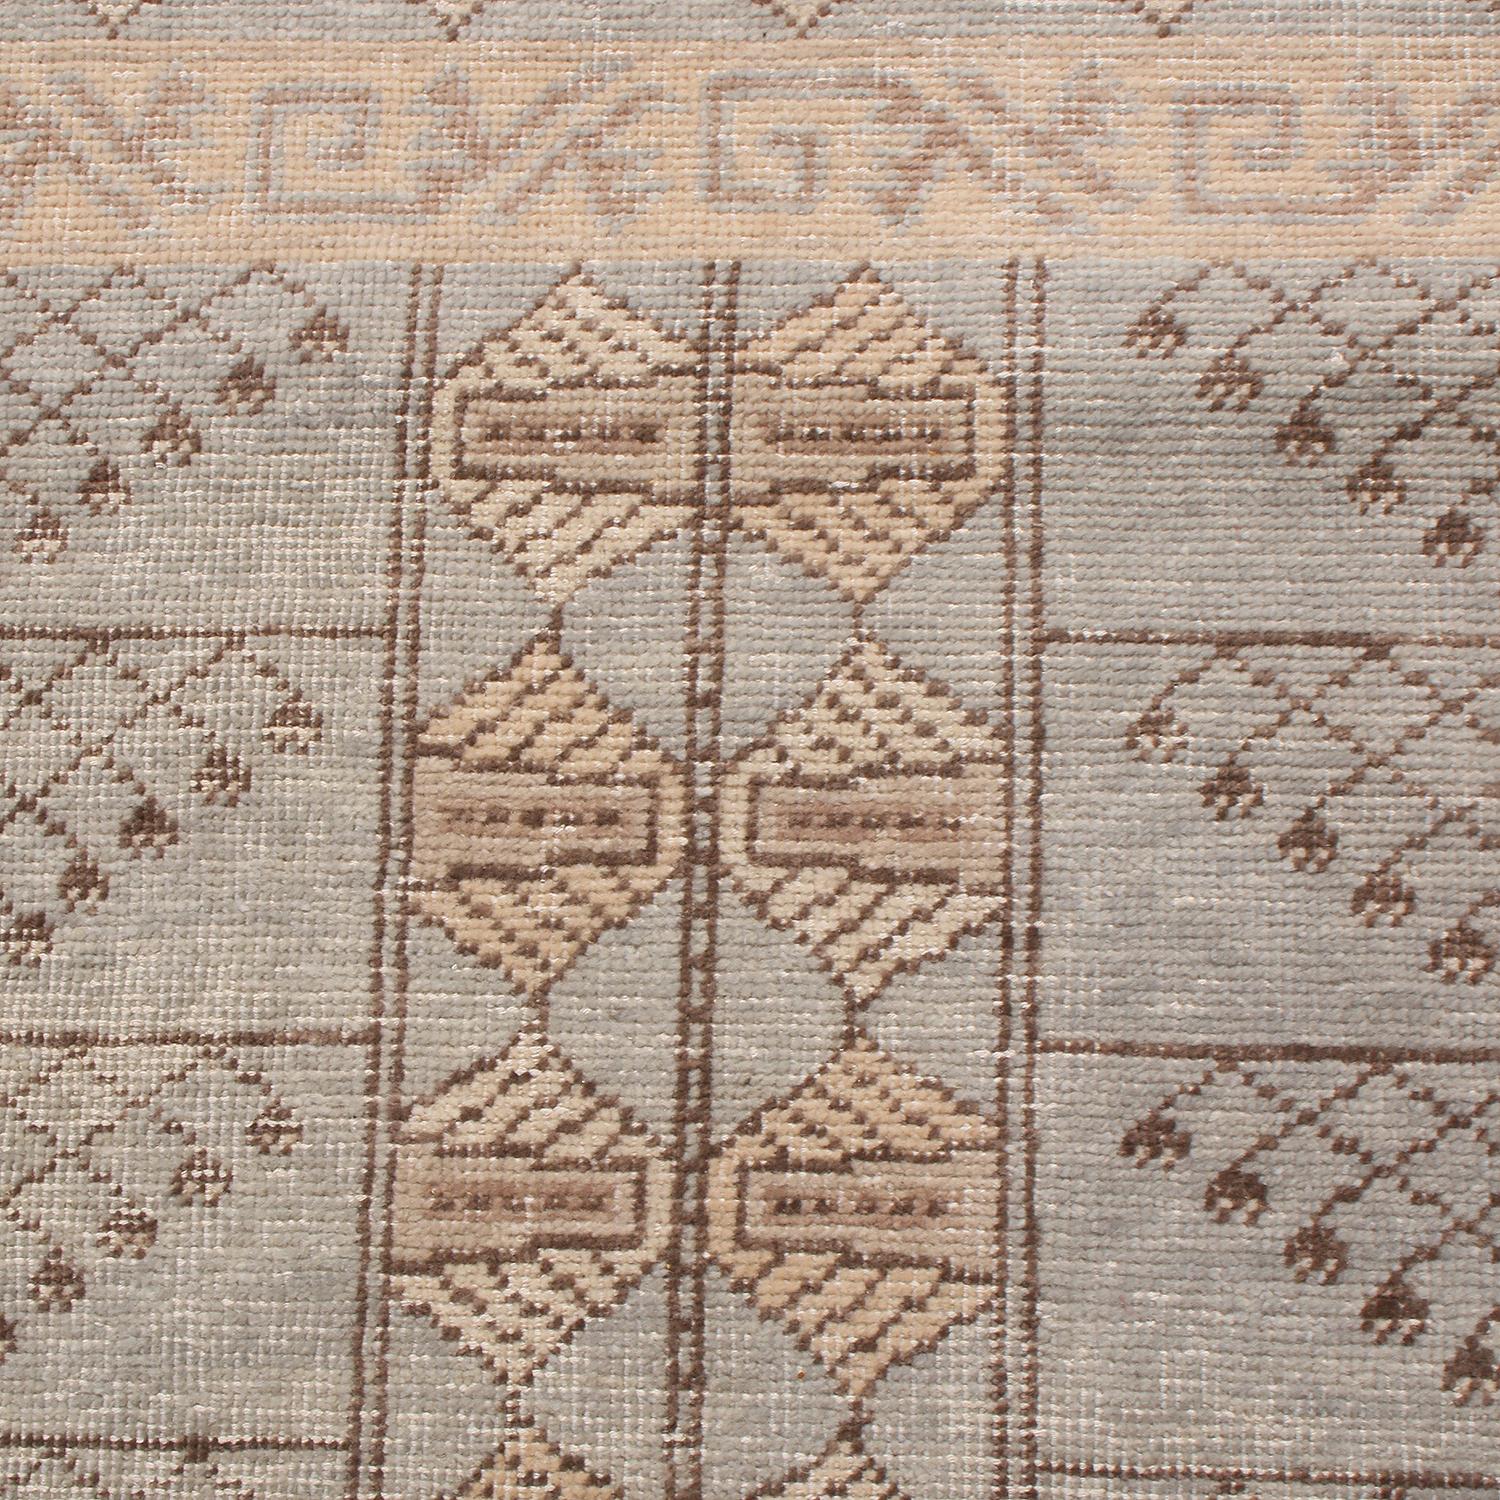 Indian Rug & Kilim’s Beige-Brown and Blue Wool Rug from the Homage Collection For Sale